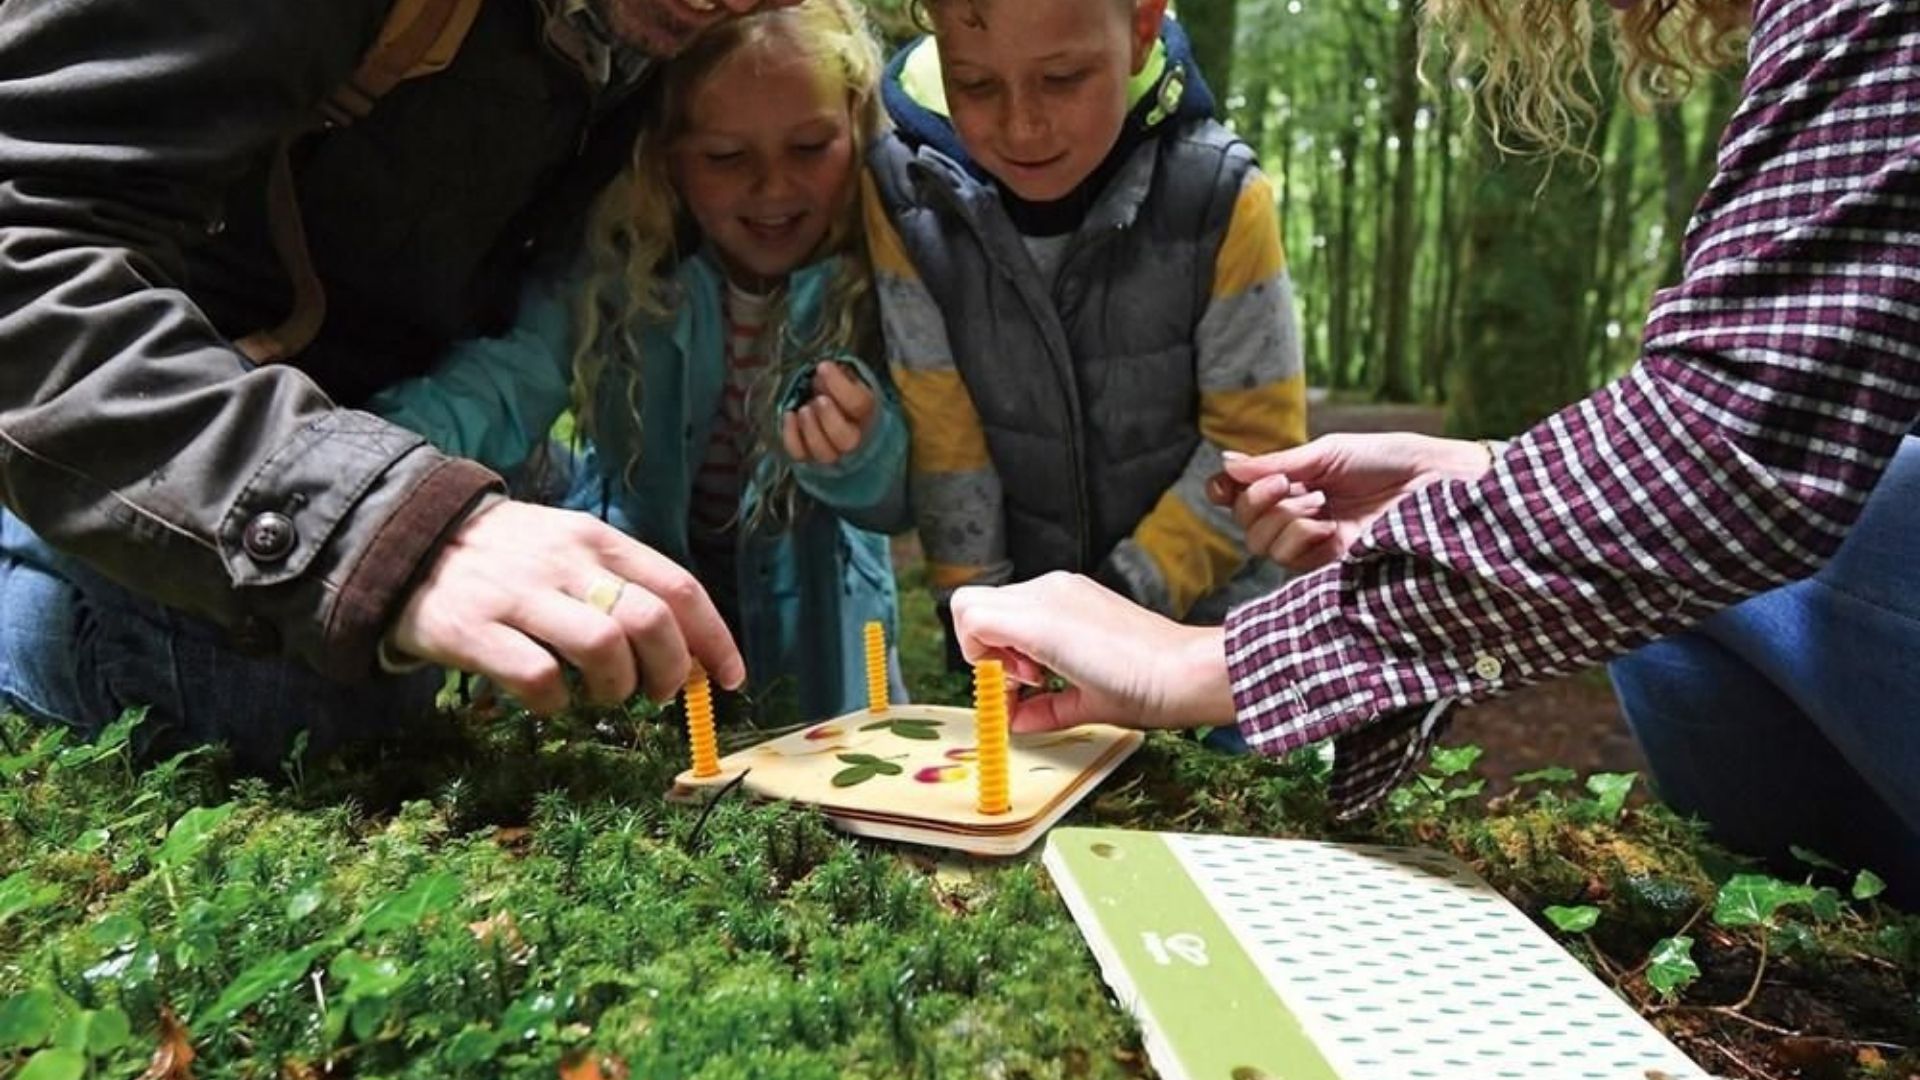 A family of two adults and two children crouch on a forest floor around a flower pressing kit, placing flowers onto it.